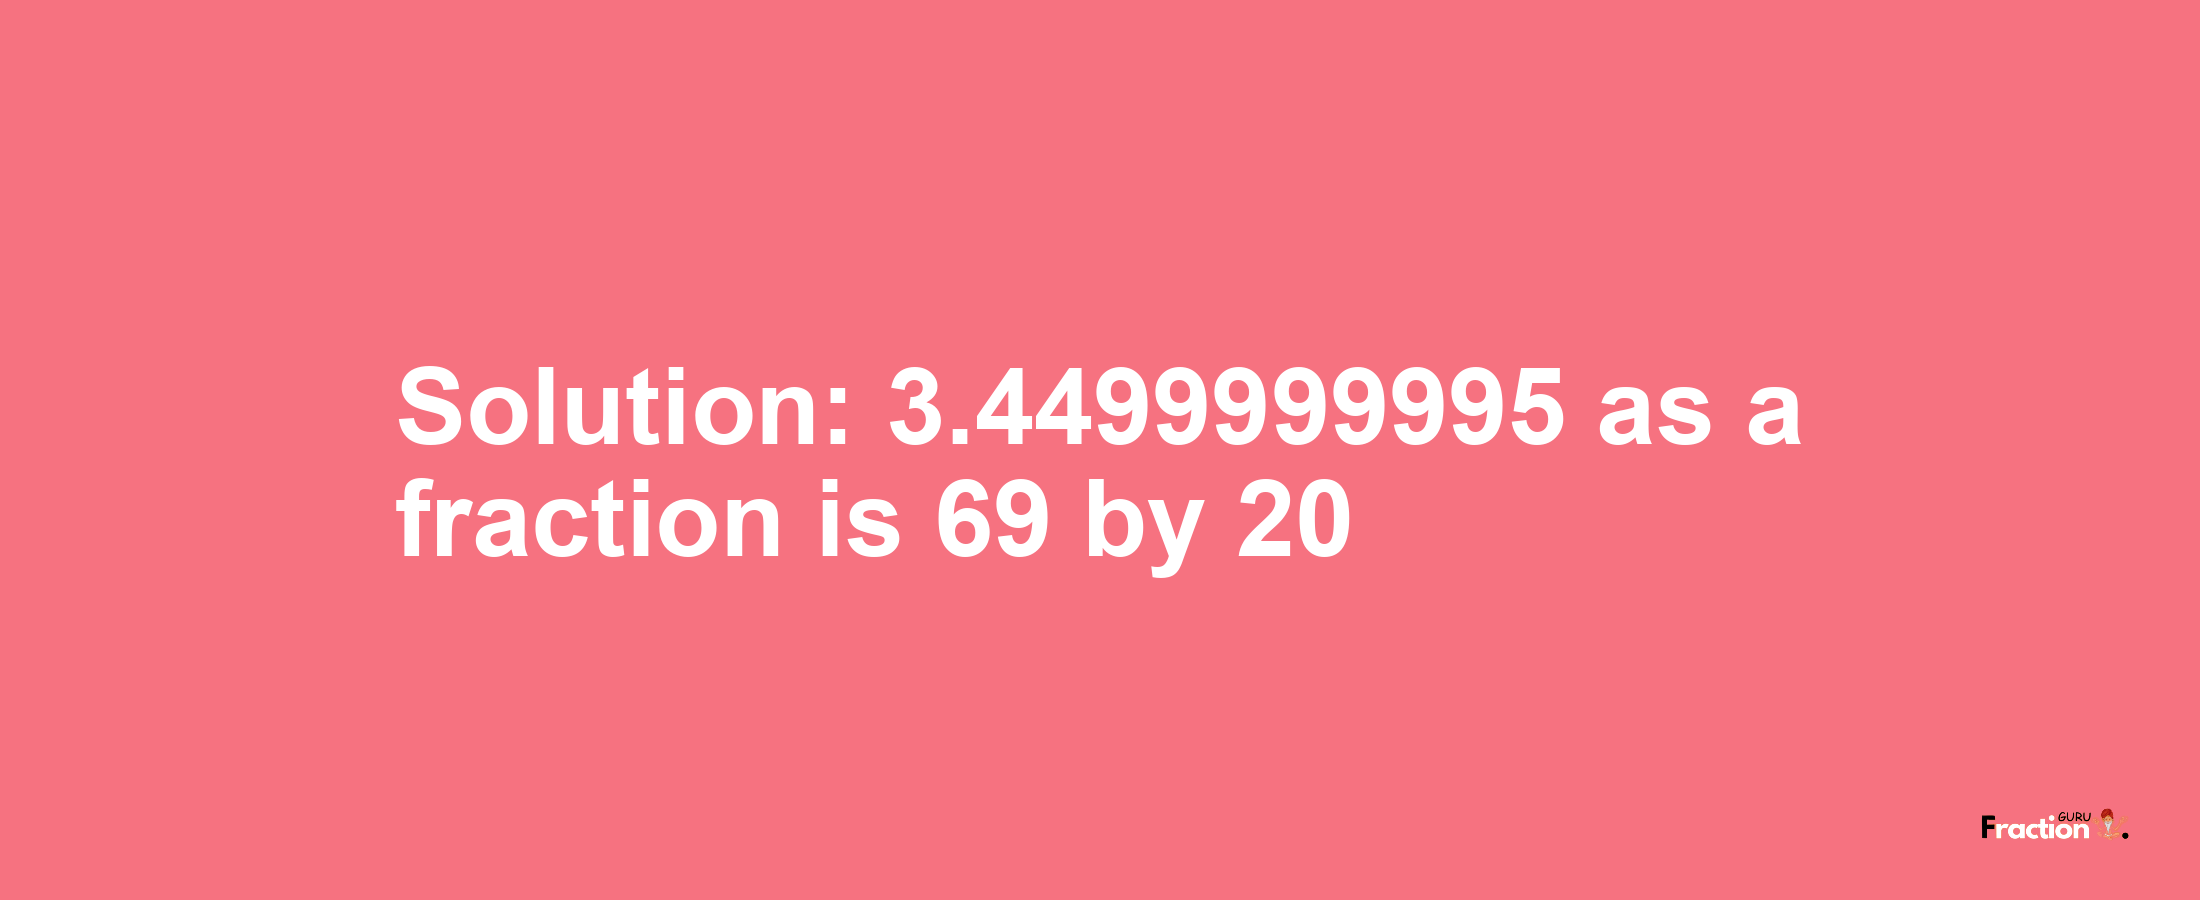 Solution:3.4499999995 as a fraction is 69/20